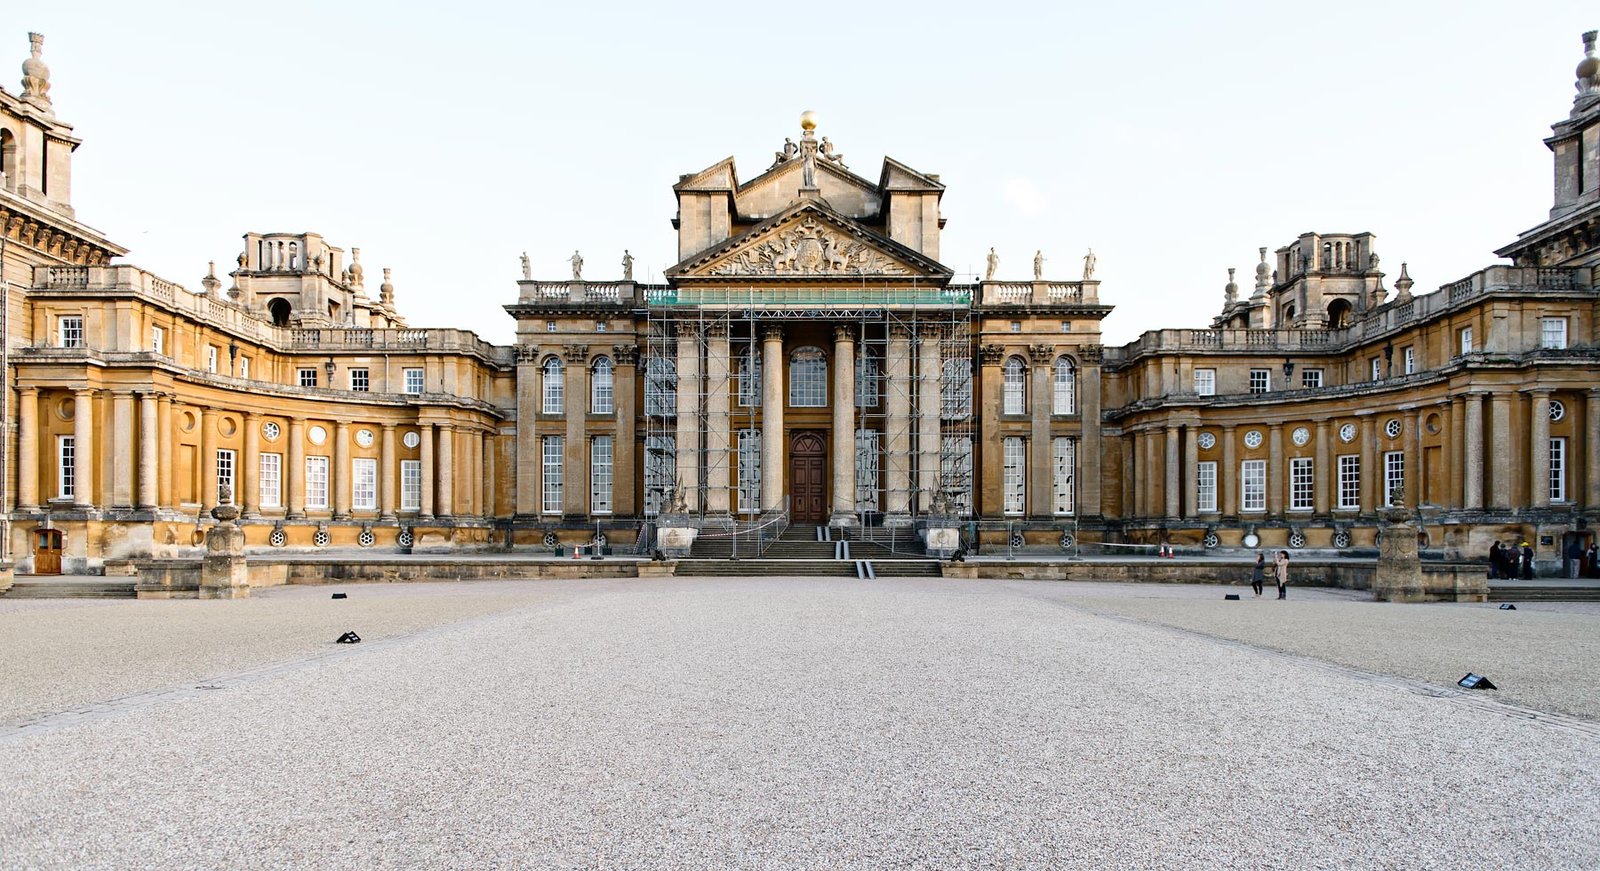 Blenheim Palace, a nice day trip from London